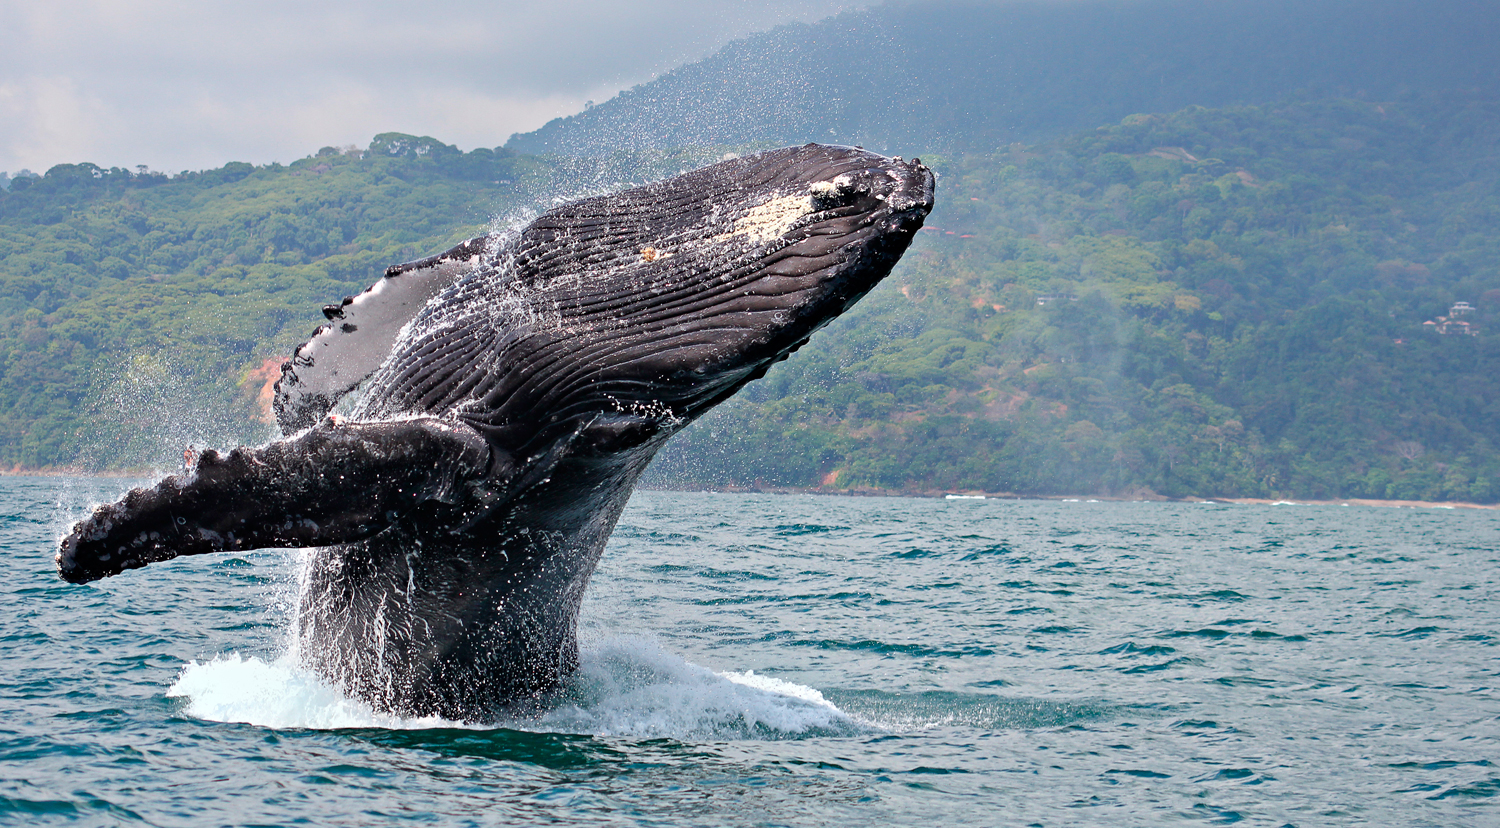 Annual Whale Watching Festival, Dolphins, Turtles and More in Ballena National Marine Park